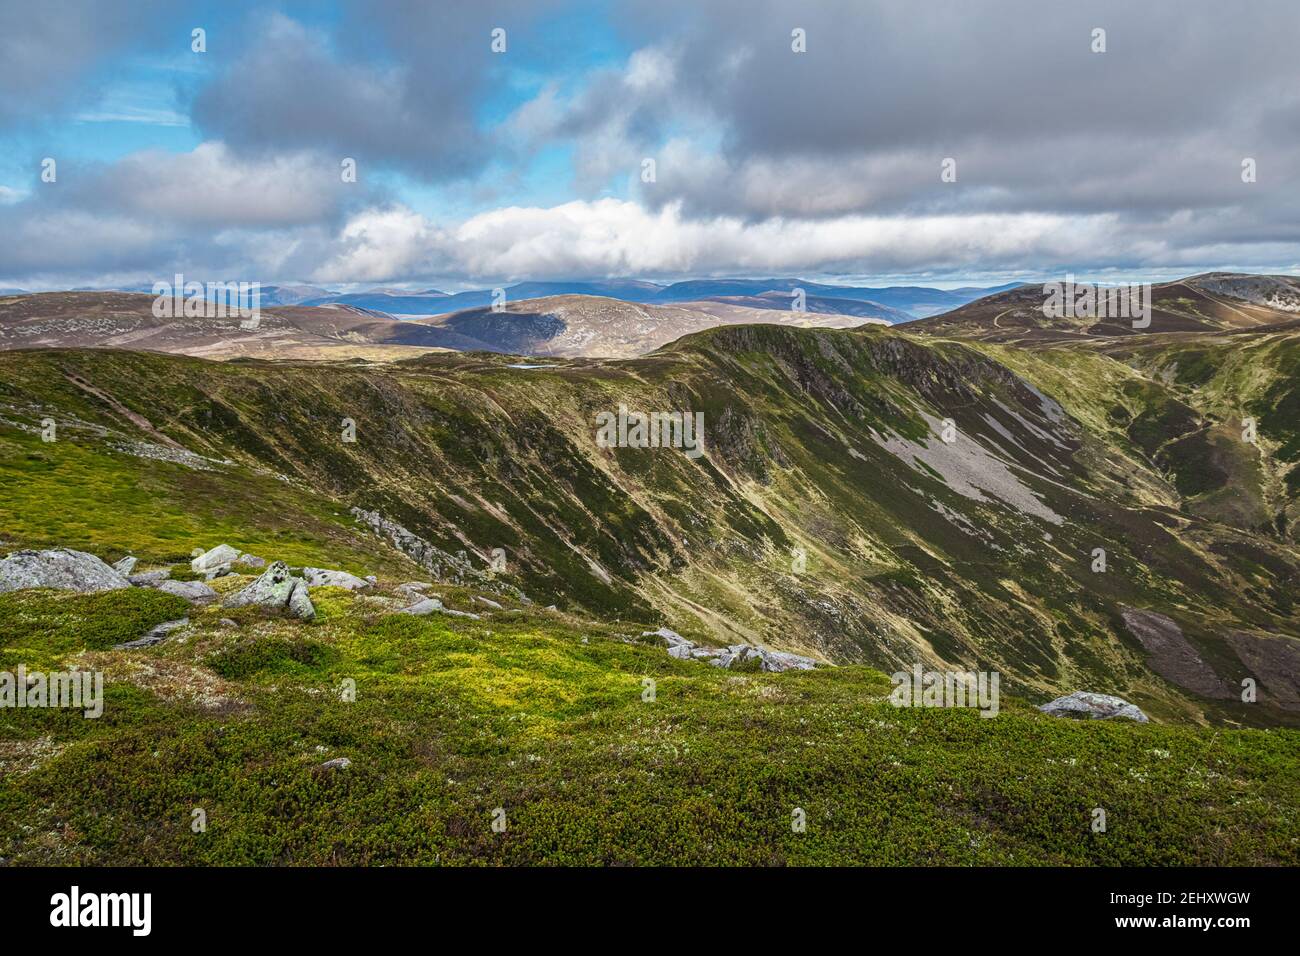 Scenic mountain view with open space and fluffy white clouds on the horizon. Summer in Cairngorm Nationl Park in Scottish Highlands. Stock Photo